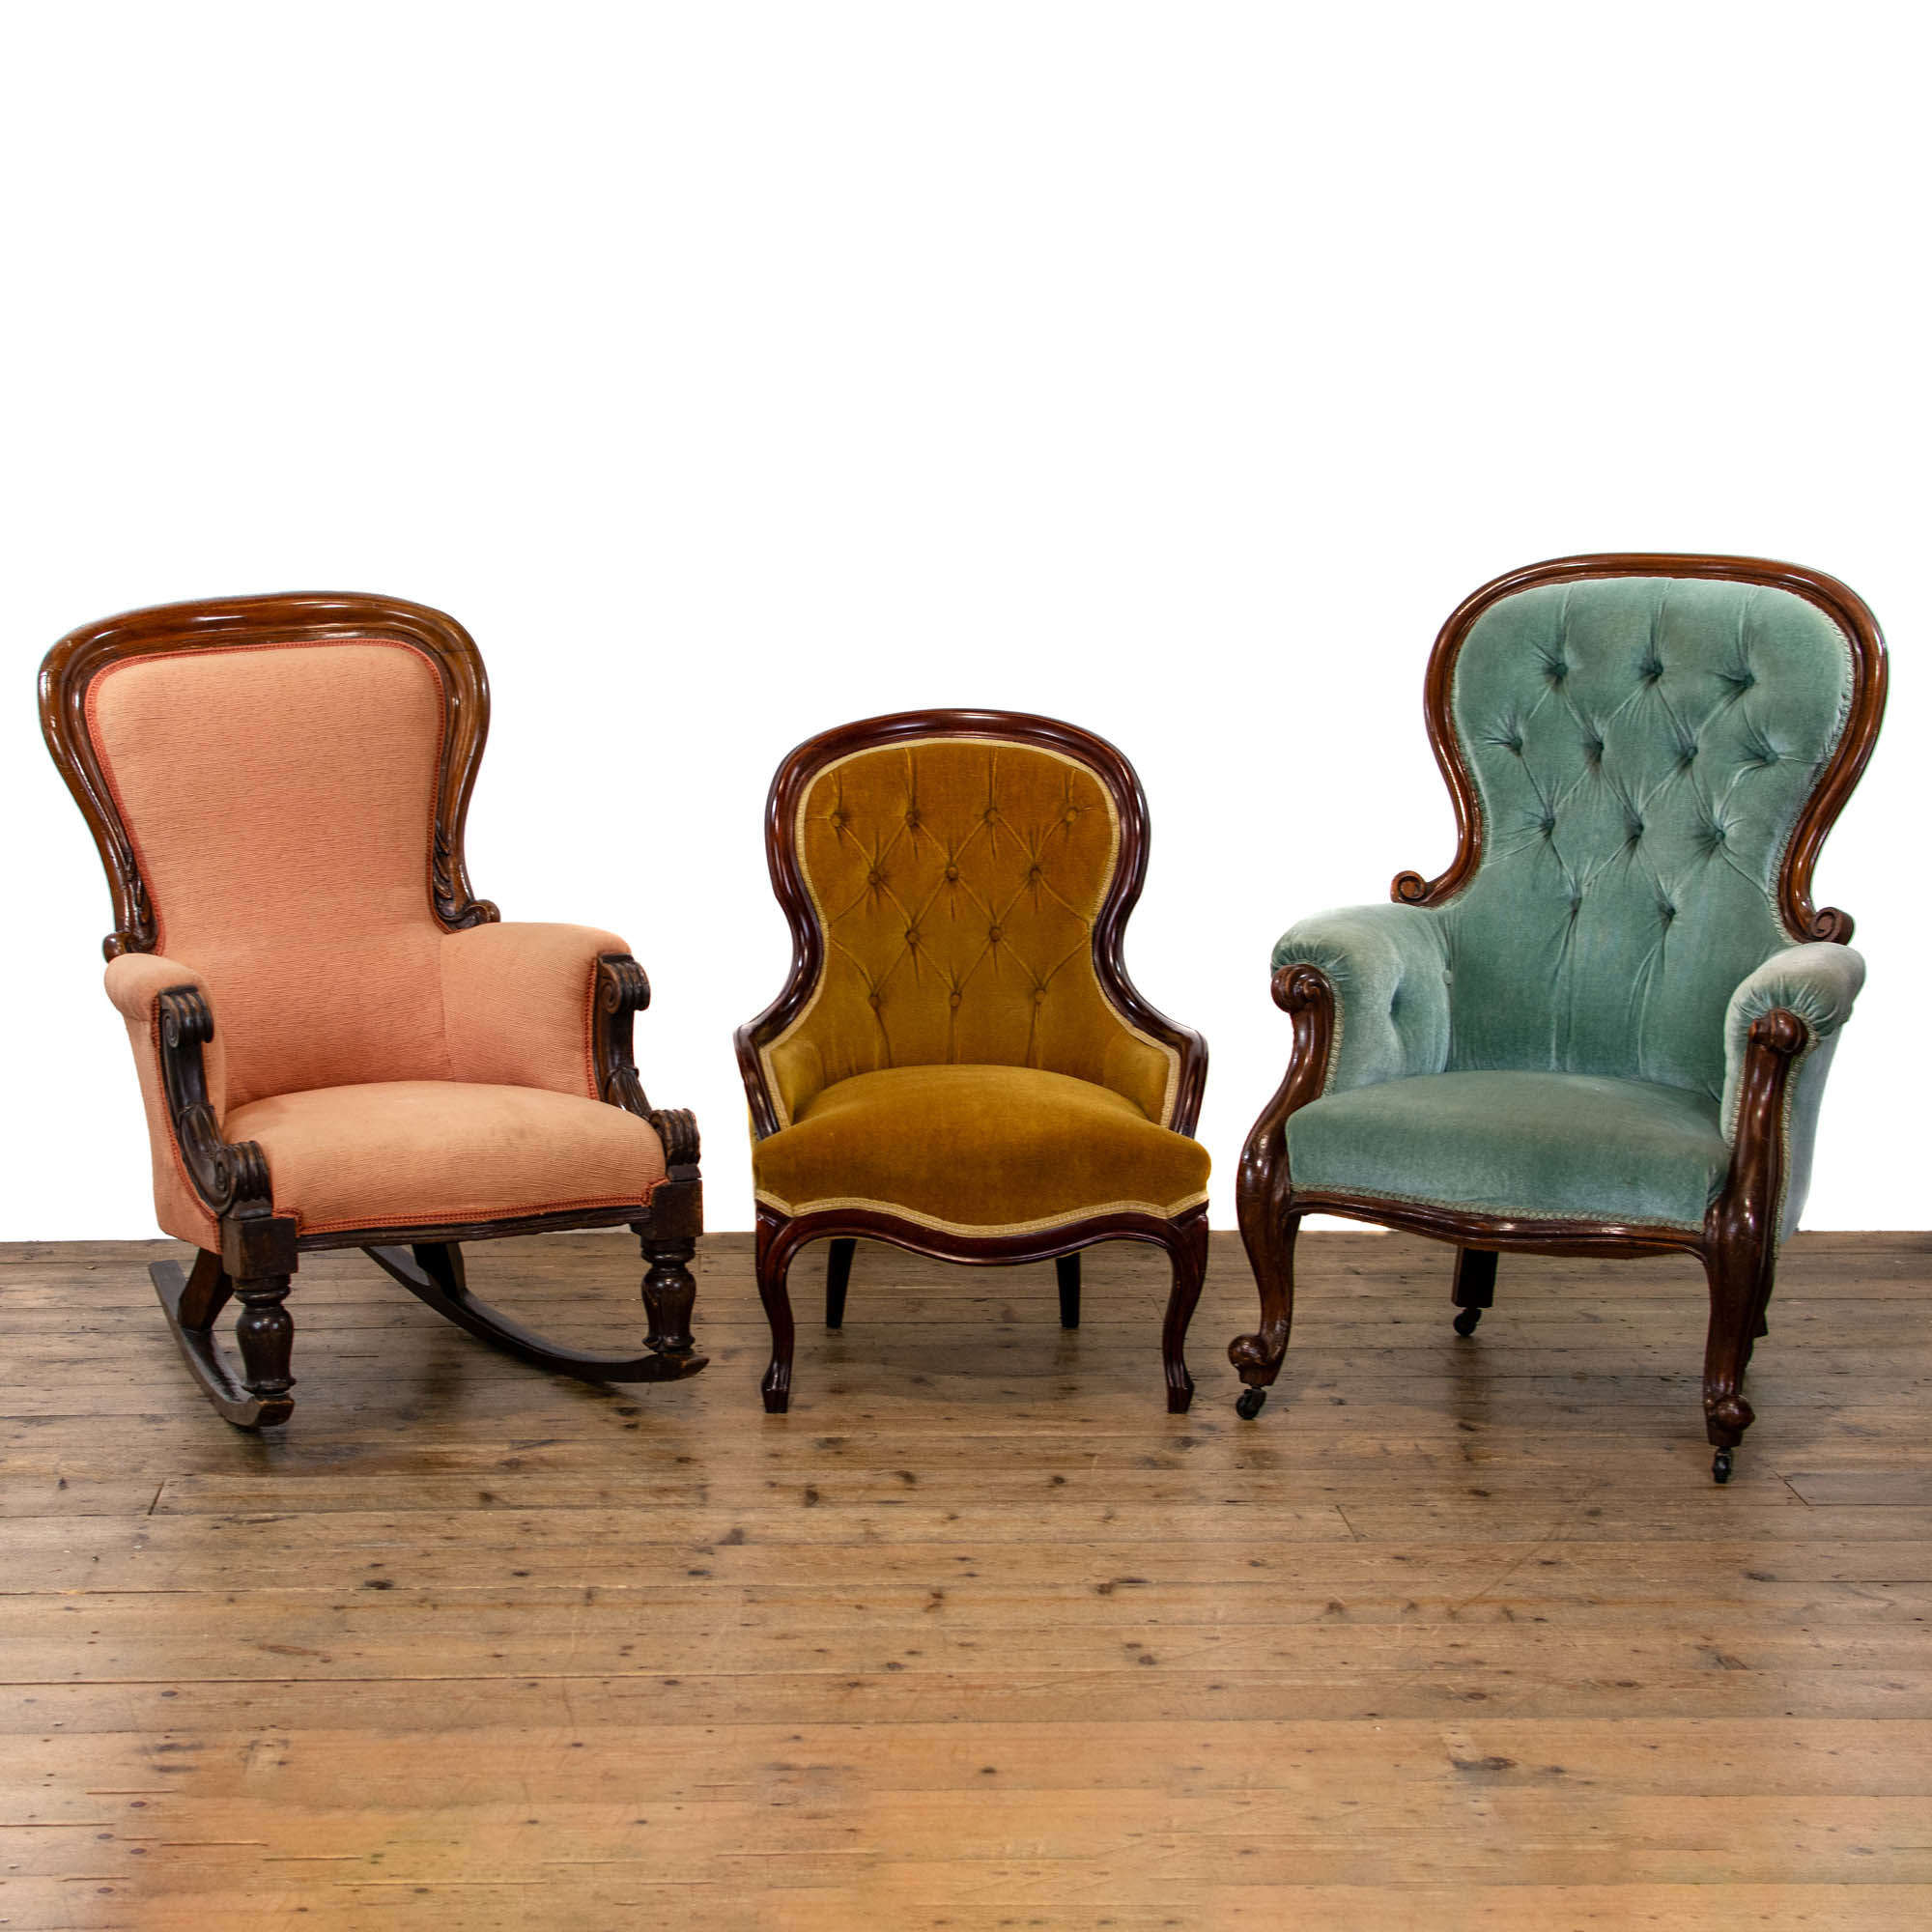 Harlequin Set Of Three Victorian Balloon Back Antique Armchairs